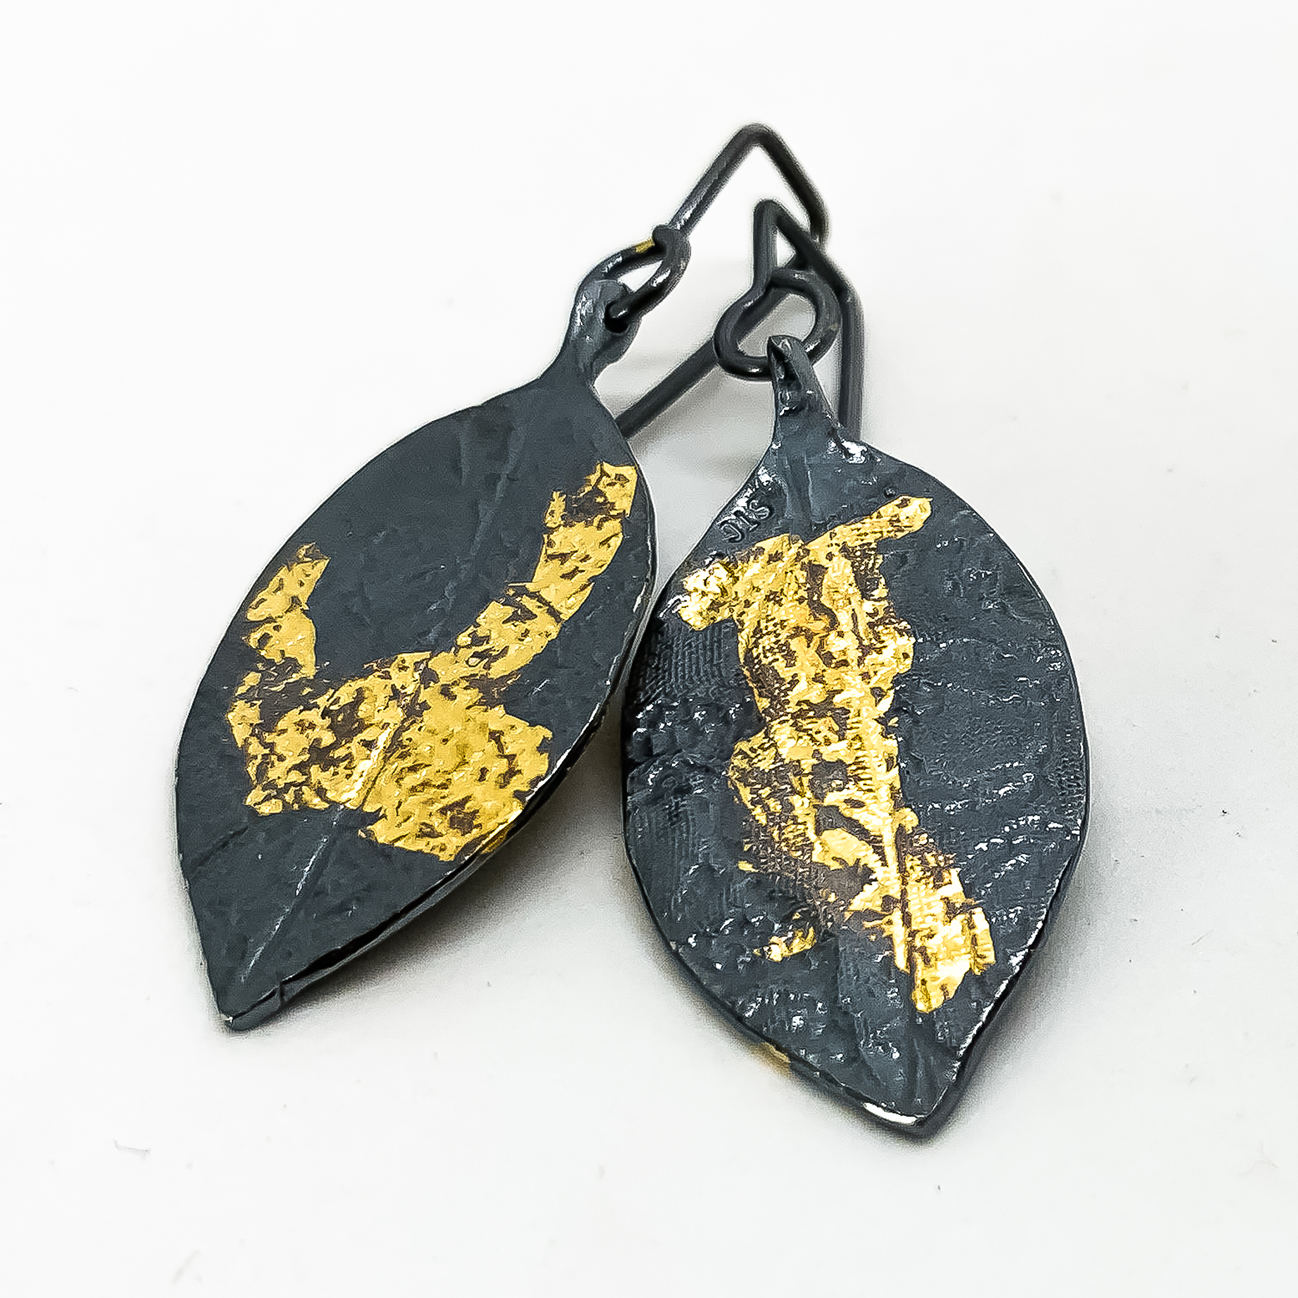 A pair of stylised leaf earrings in Fine Silver that has been oxidised to a deep black with lace embossed into the surface and random patterns of 24ct Gold leaf applied like sunlight dappling the surface